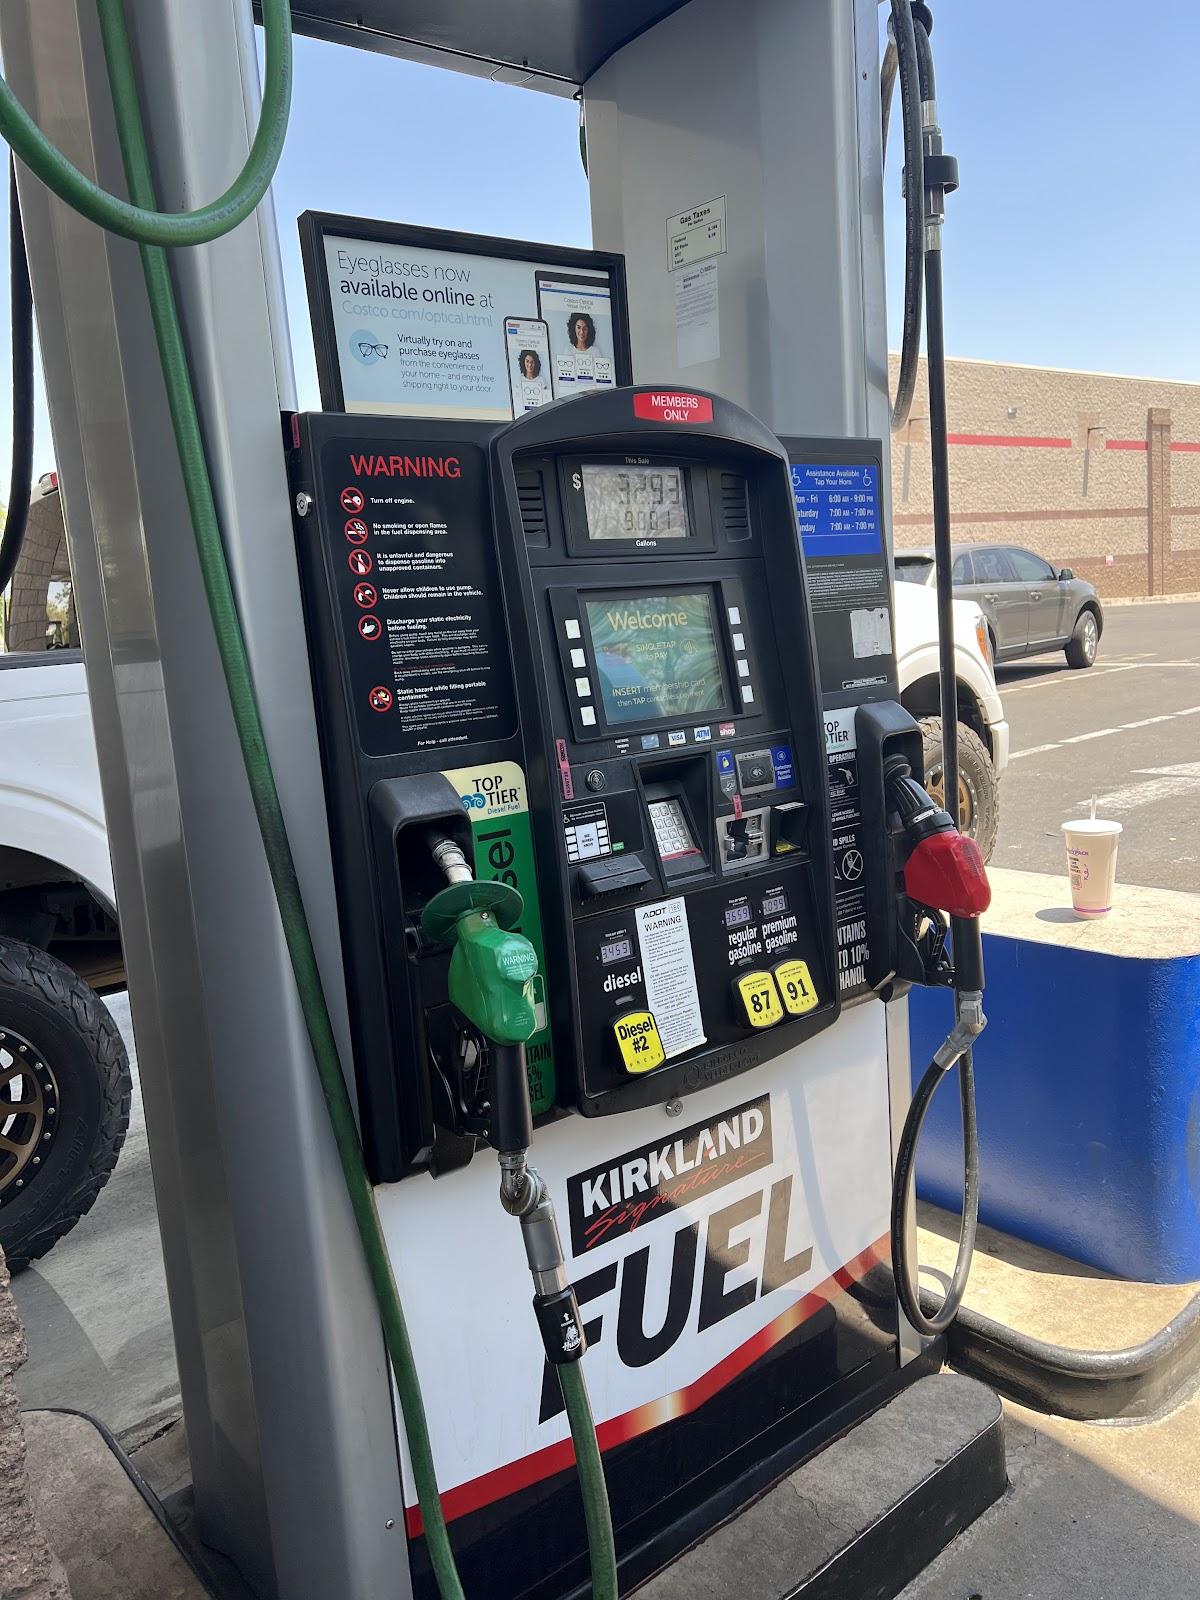 Do You Need A Costco Card To Get Diesel Fuel?